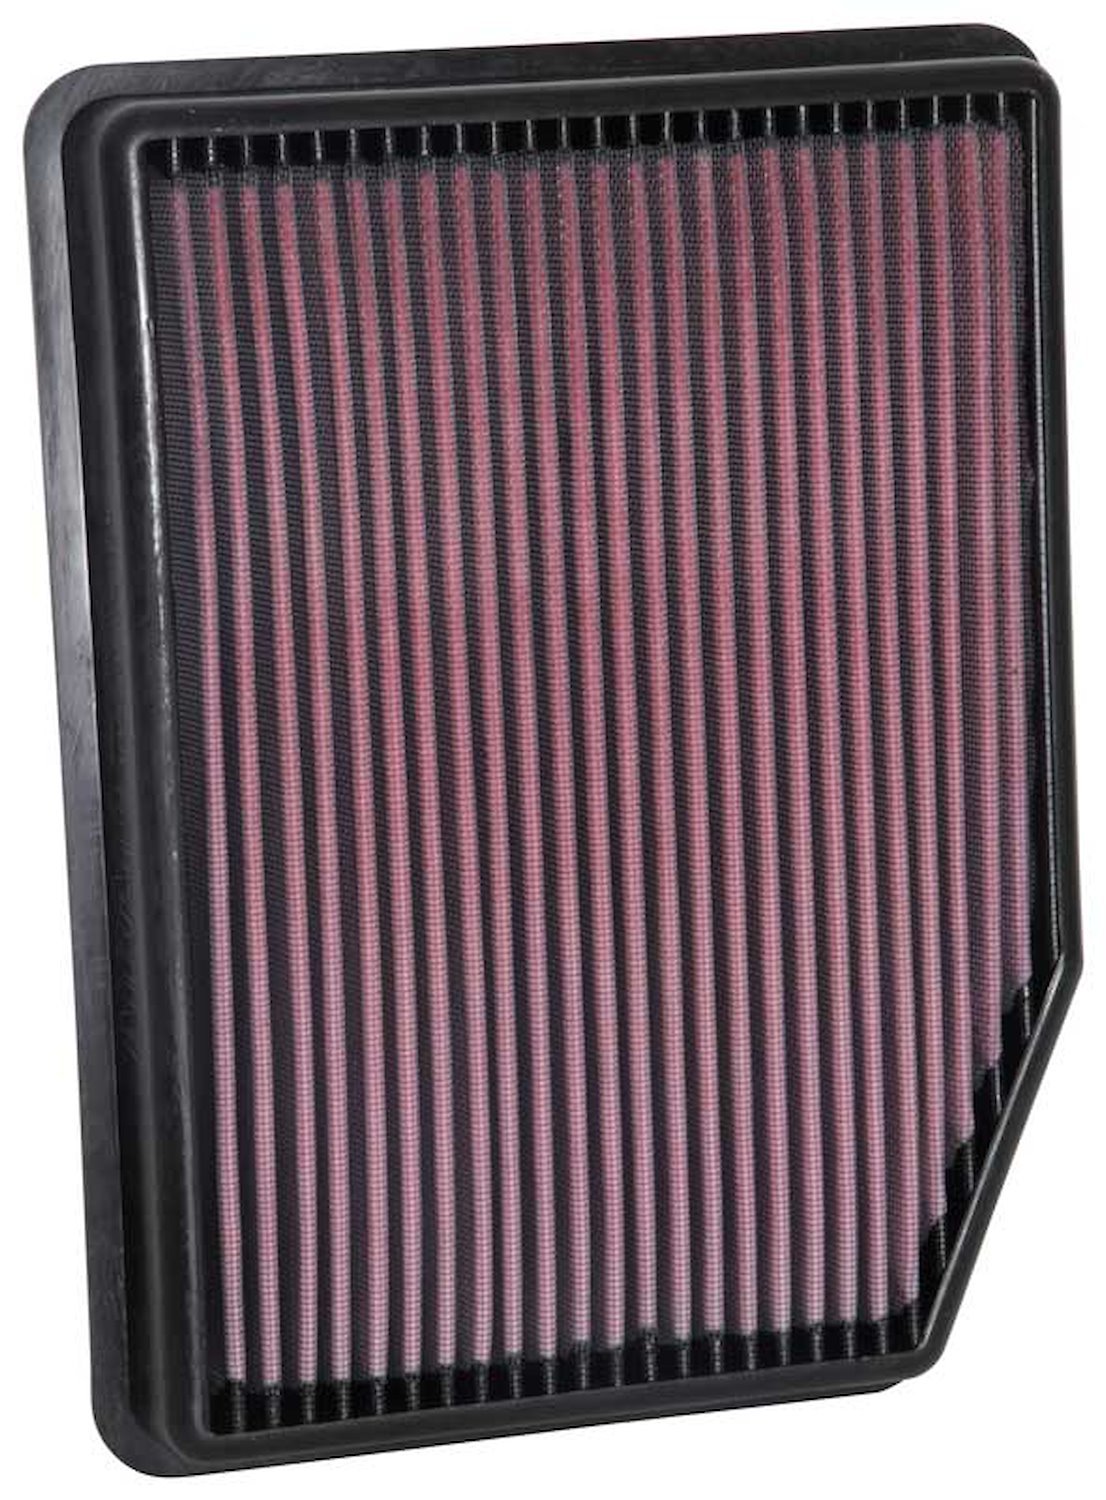 SynthaFlow 'Oiled' OE Replacement Air Filter 2019 Chevy Silverado 1500/GMC Sierra 1500 5.3L, 6.2L V8